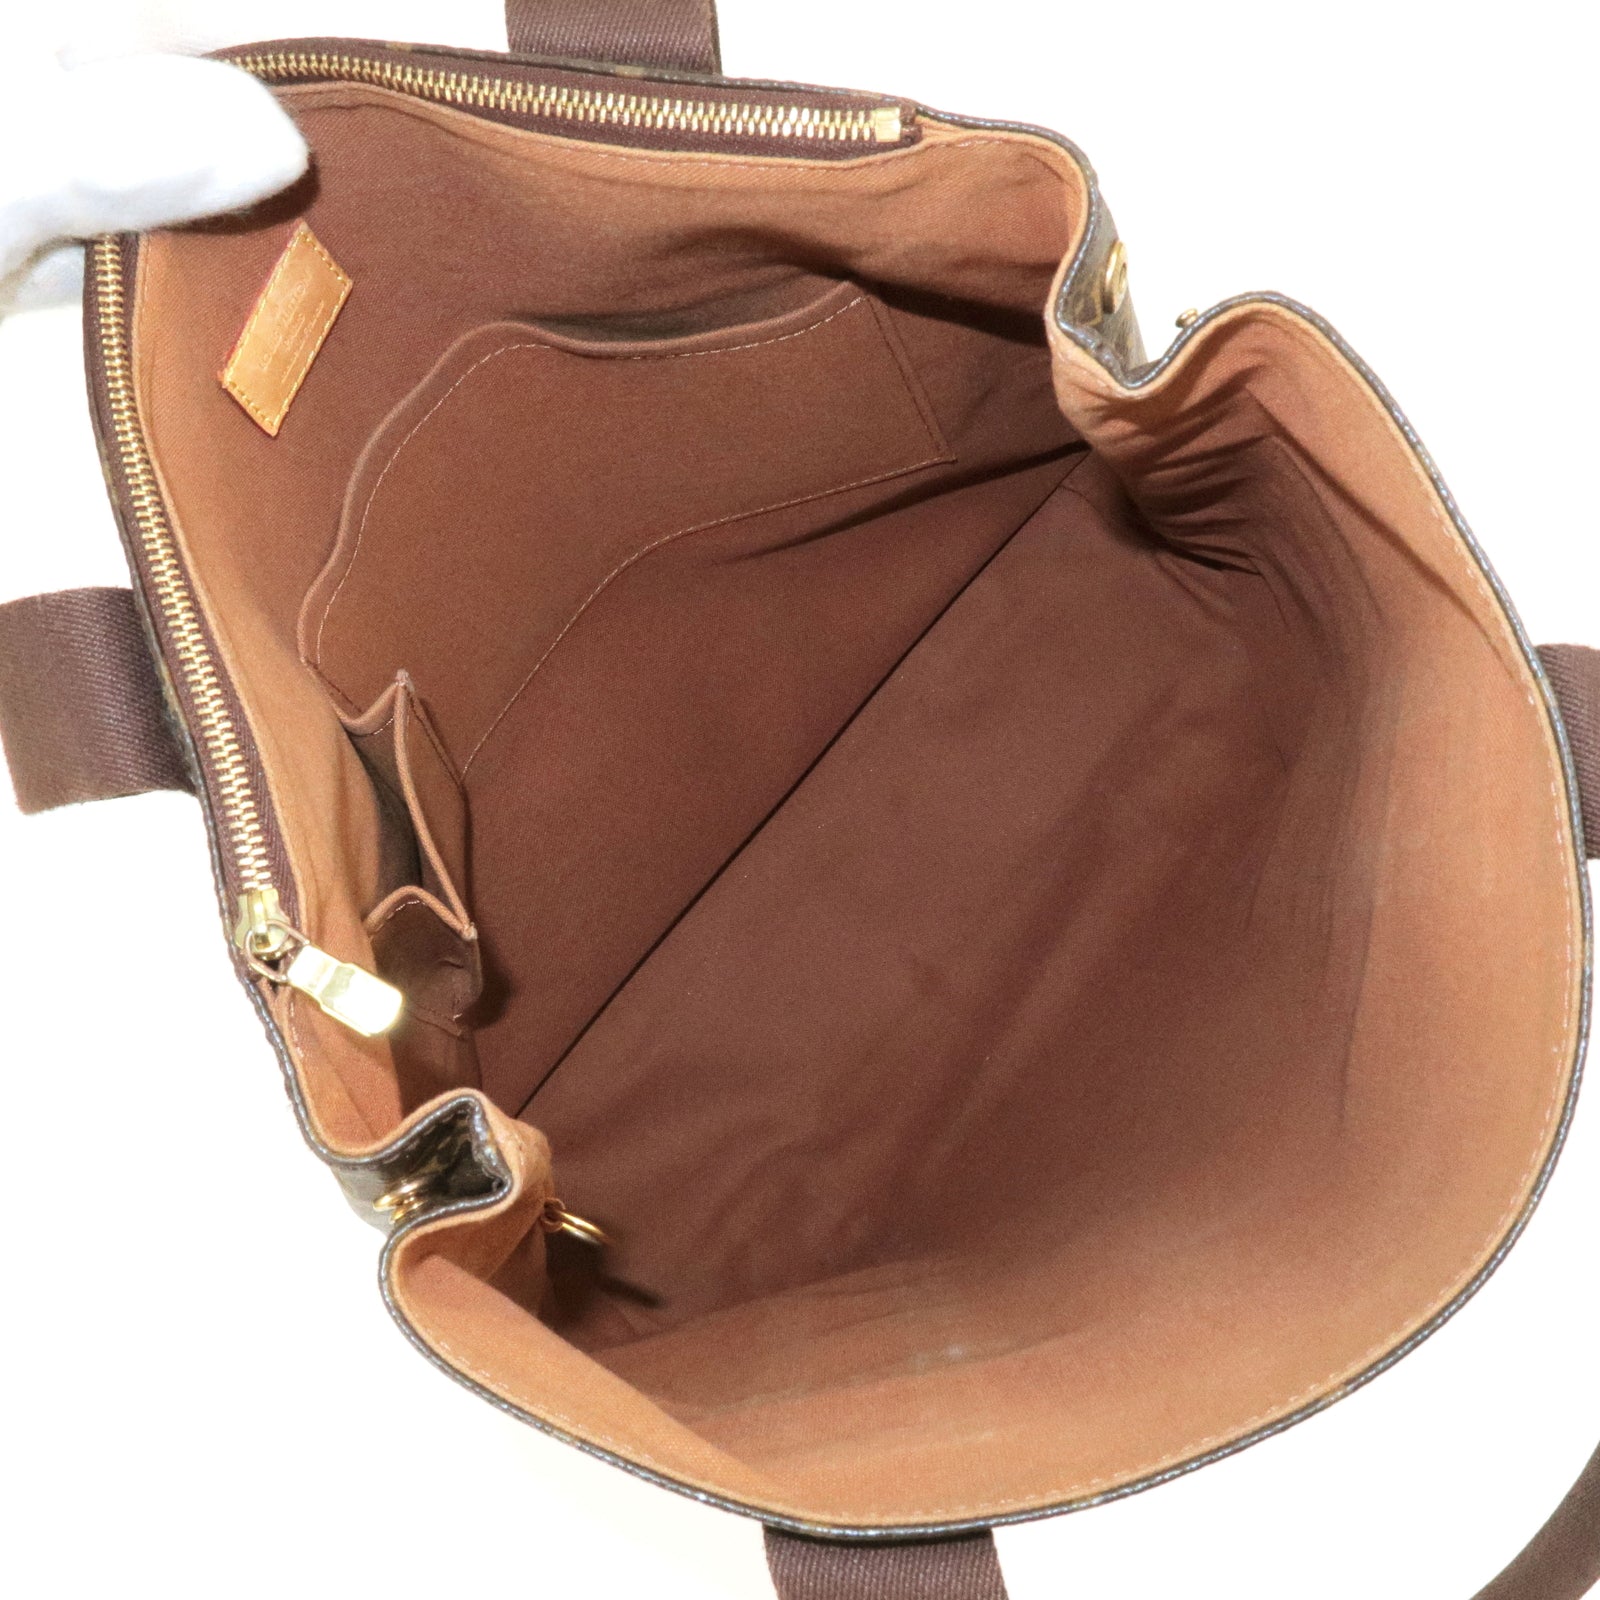 Beaubourg leather satchel